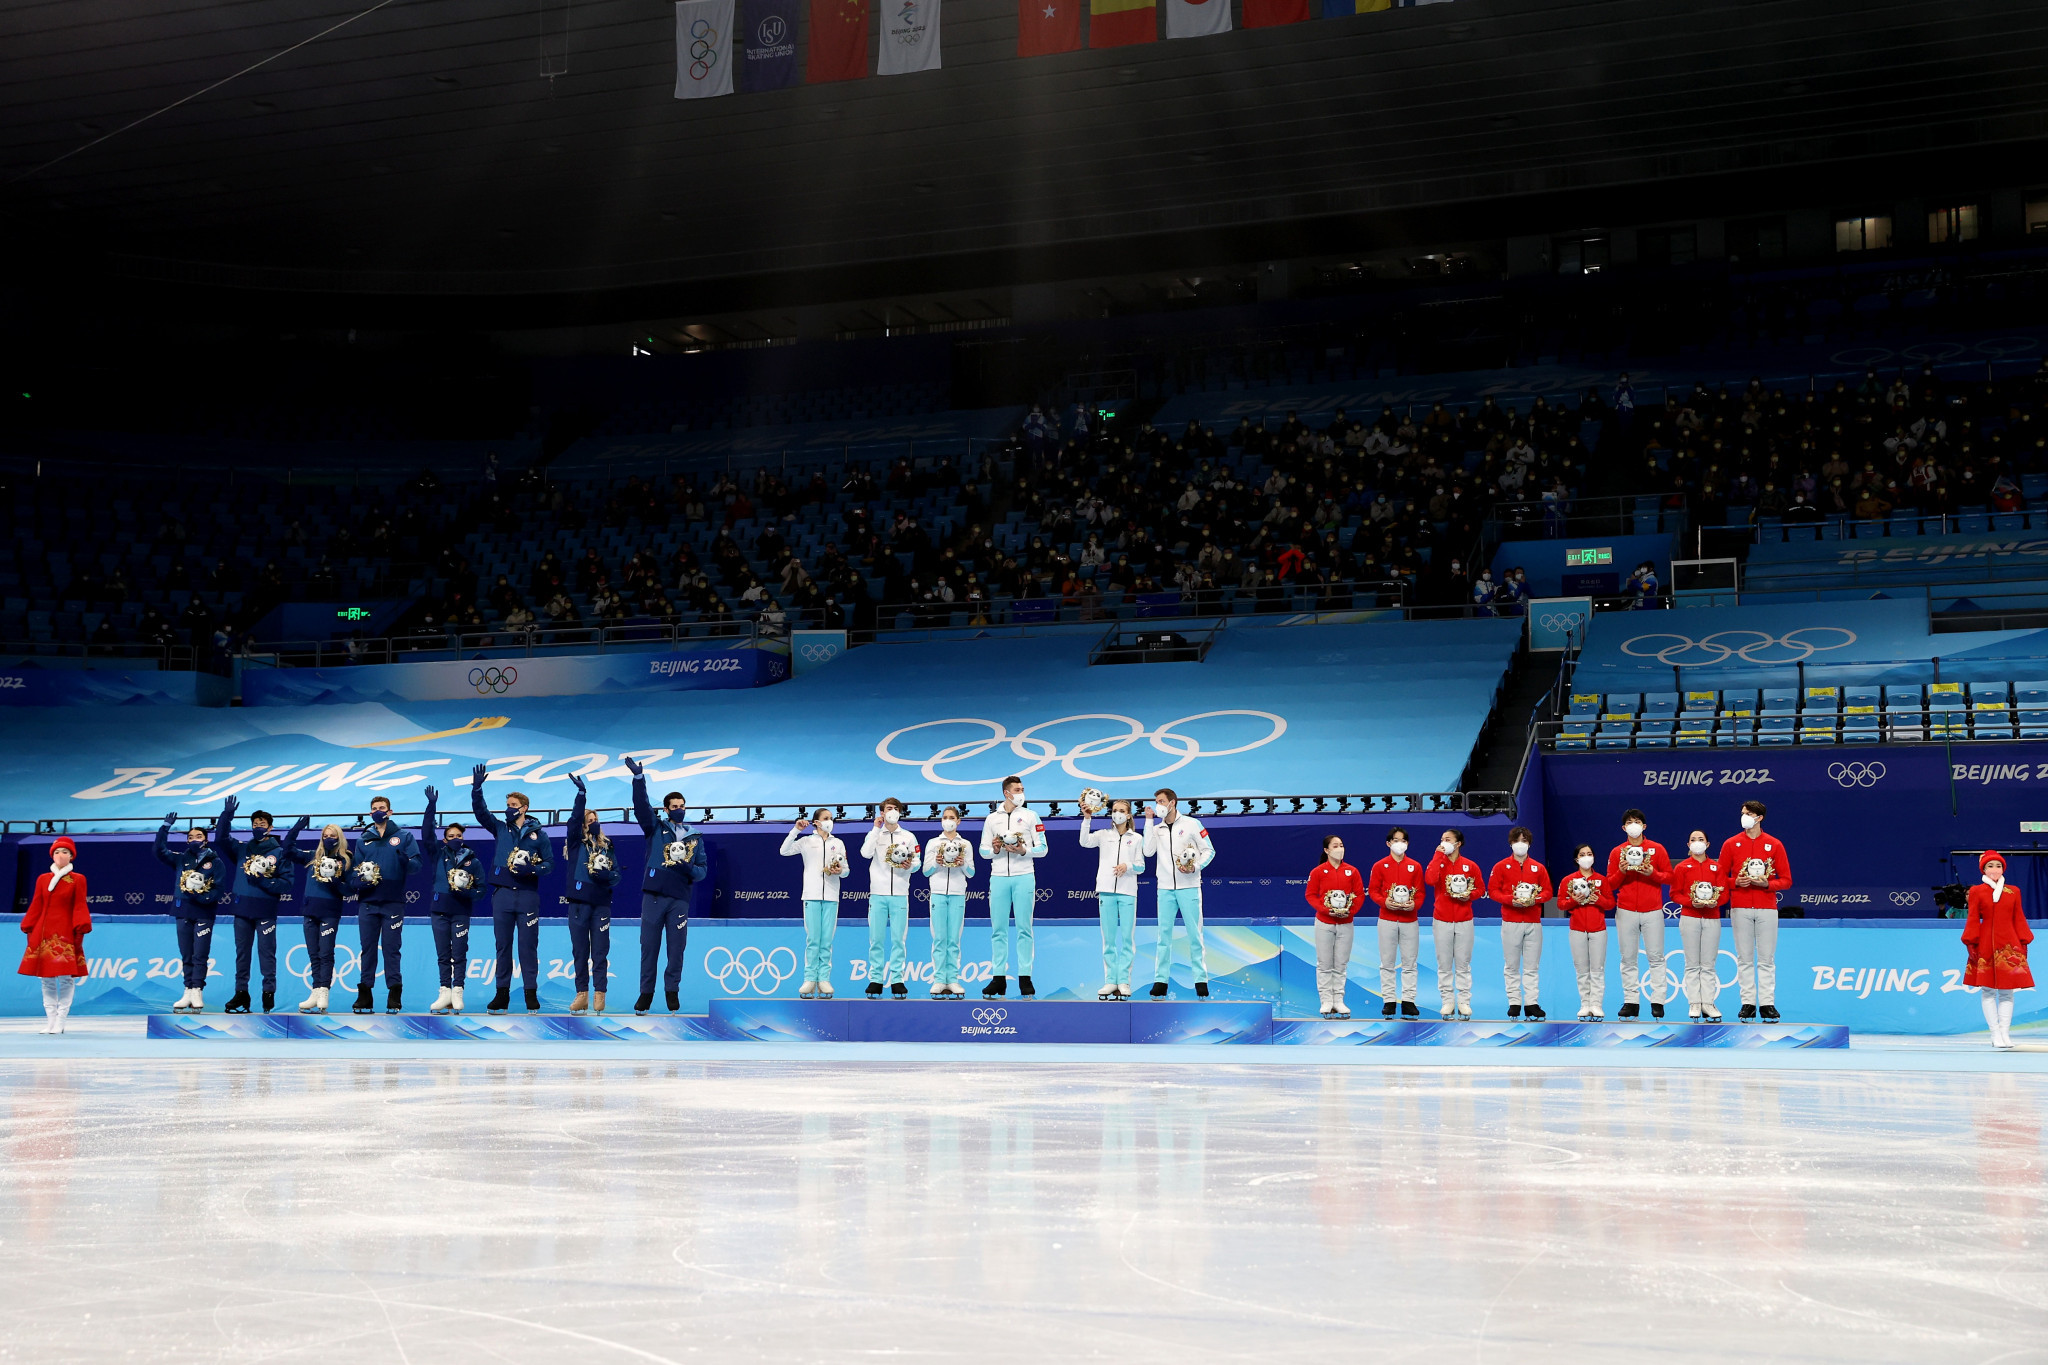 The medal ceremony for the team figure skating event at Beijing 2022 has yet to take place due to the ongoing Kamila Valieva case ©Getty Images